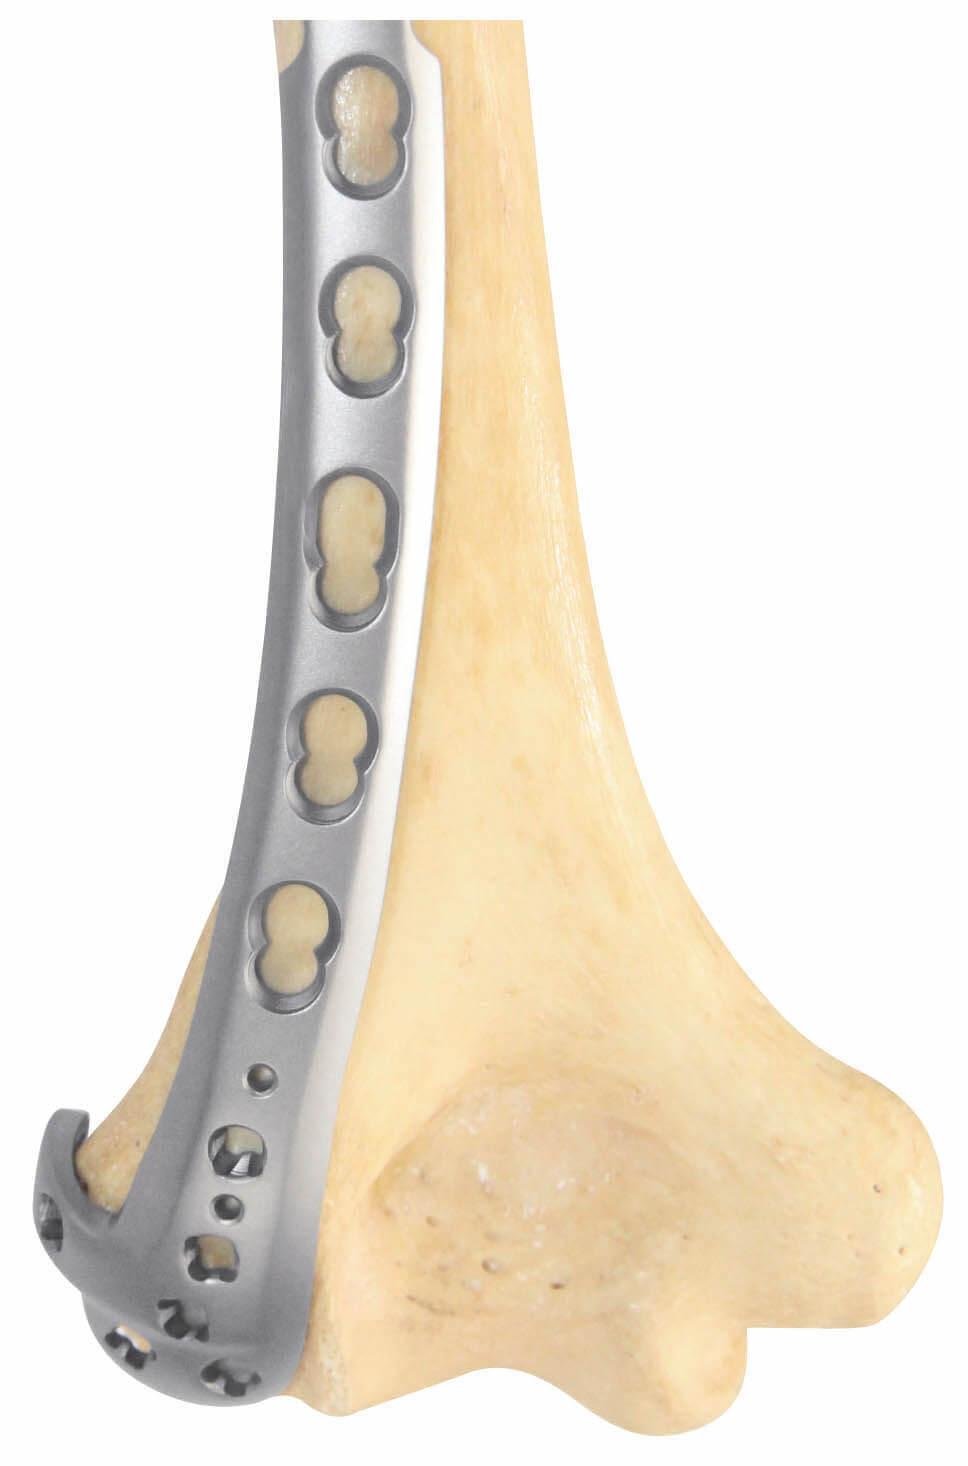 Distal lateral humeral universal plate-Placa ángulo variable húmero lateral dist